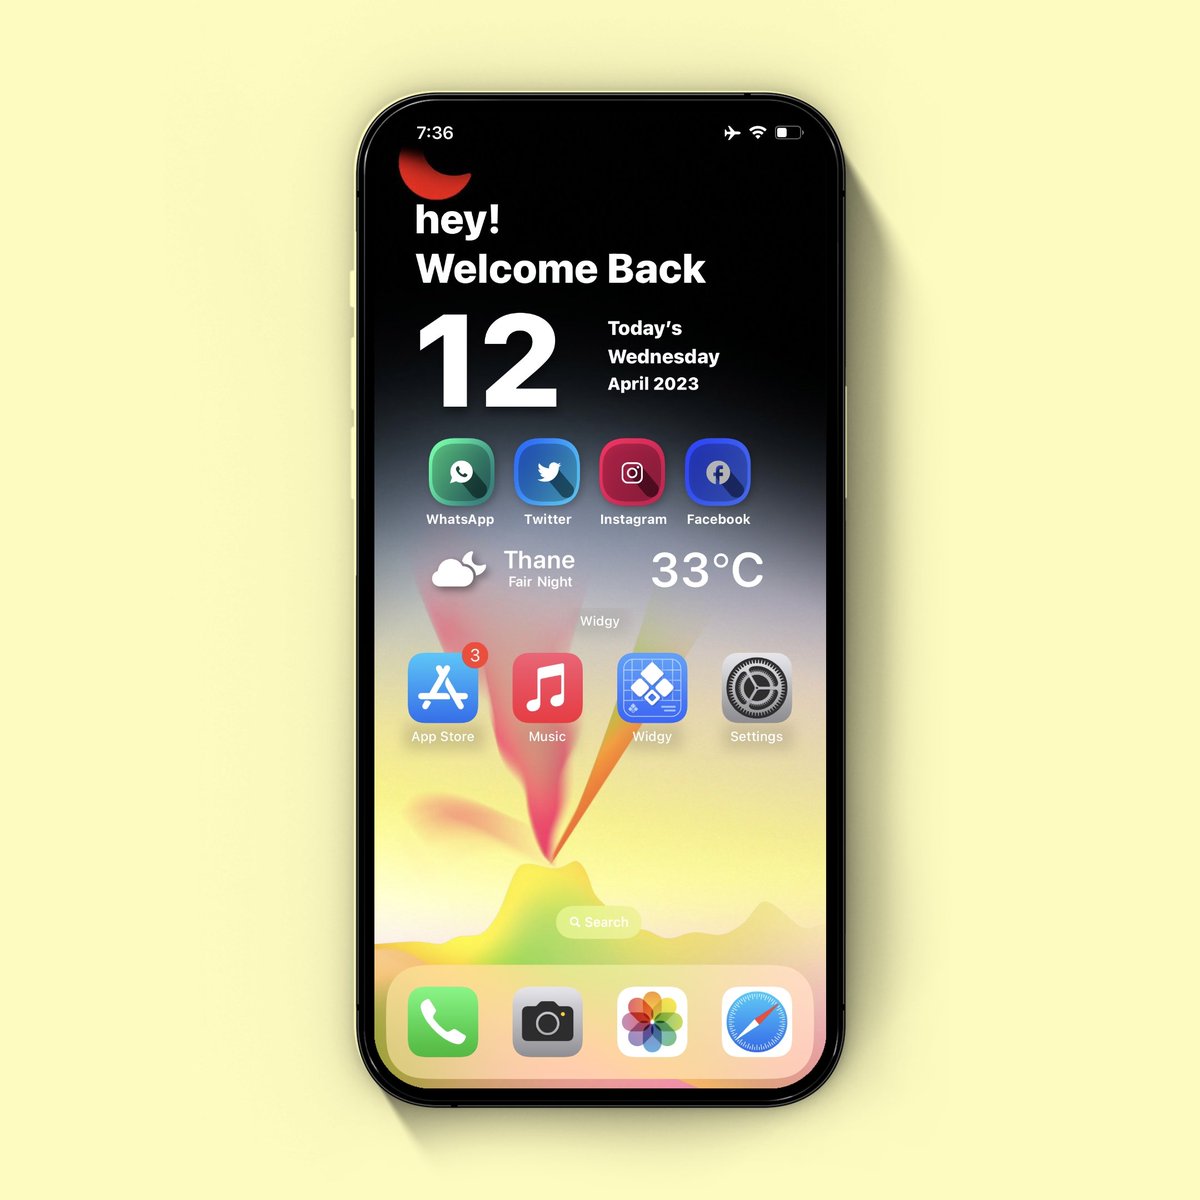 Current setup for iOS users you can use it on any iPhone With ⬇️⬇️⬇️

#Mixoswidgets 

bit.ly/MixOswidgets

Mock-up ScreenshotSL by @SeanKly 

Wall by @alex2clemente 

Icon theme default

#iOS16 #iOS17 #iOS164 #widgy #iphone15promax #apple #iPhone13ProMax #applewwdc